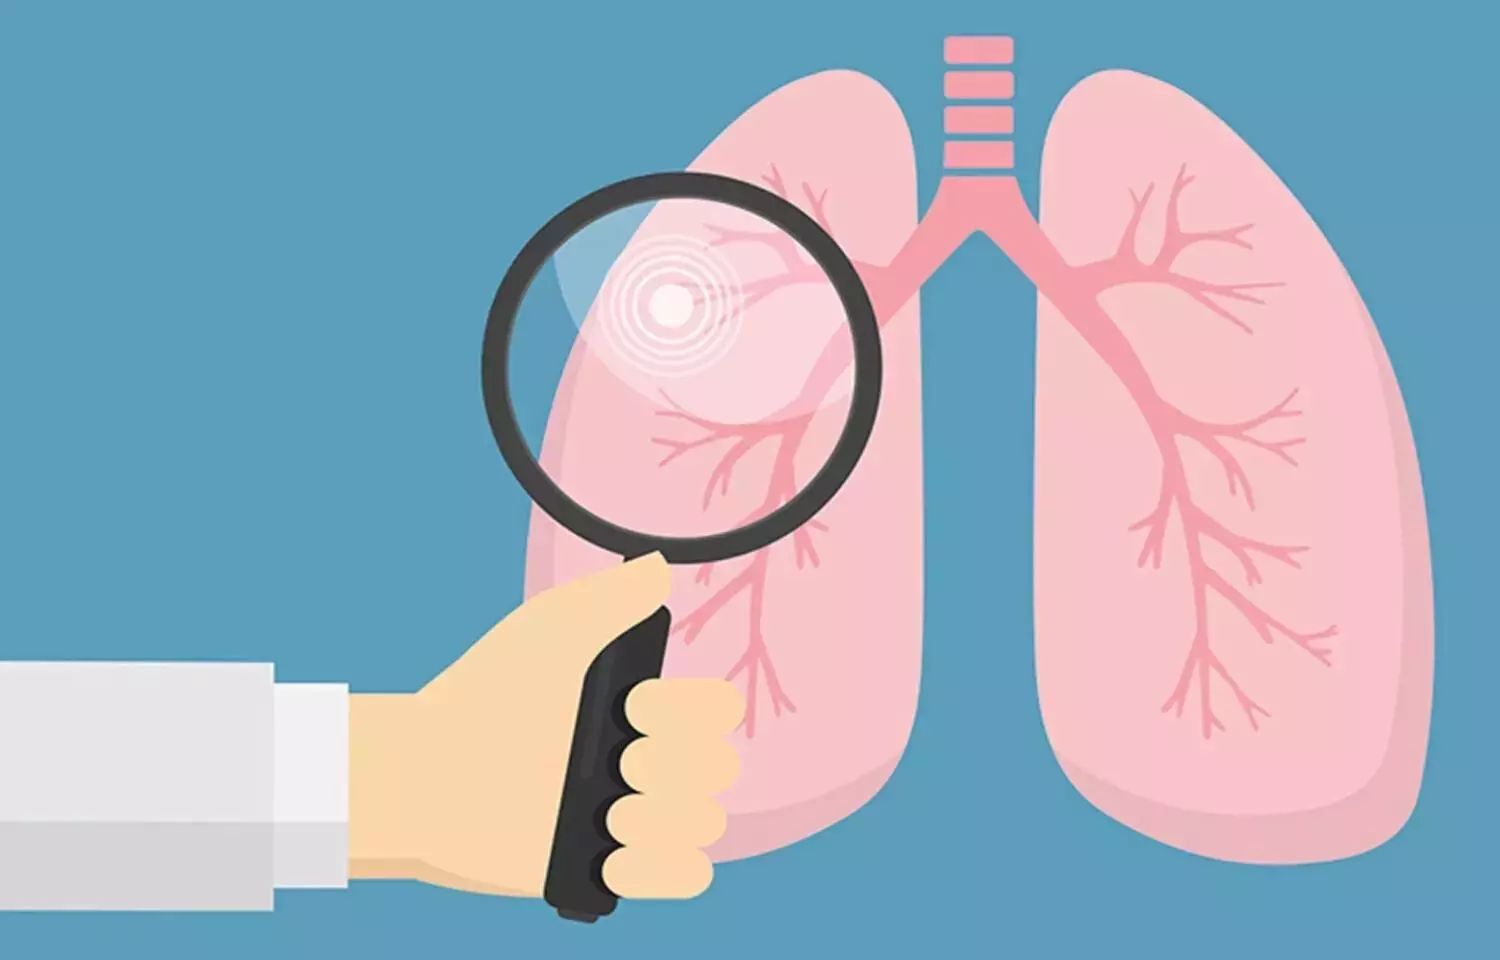 Lung transplant recipients likely to contract Legionnaires disease from the donor